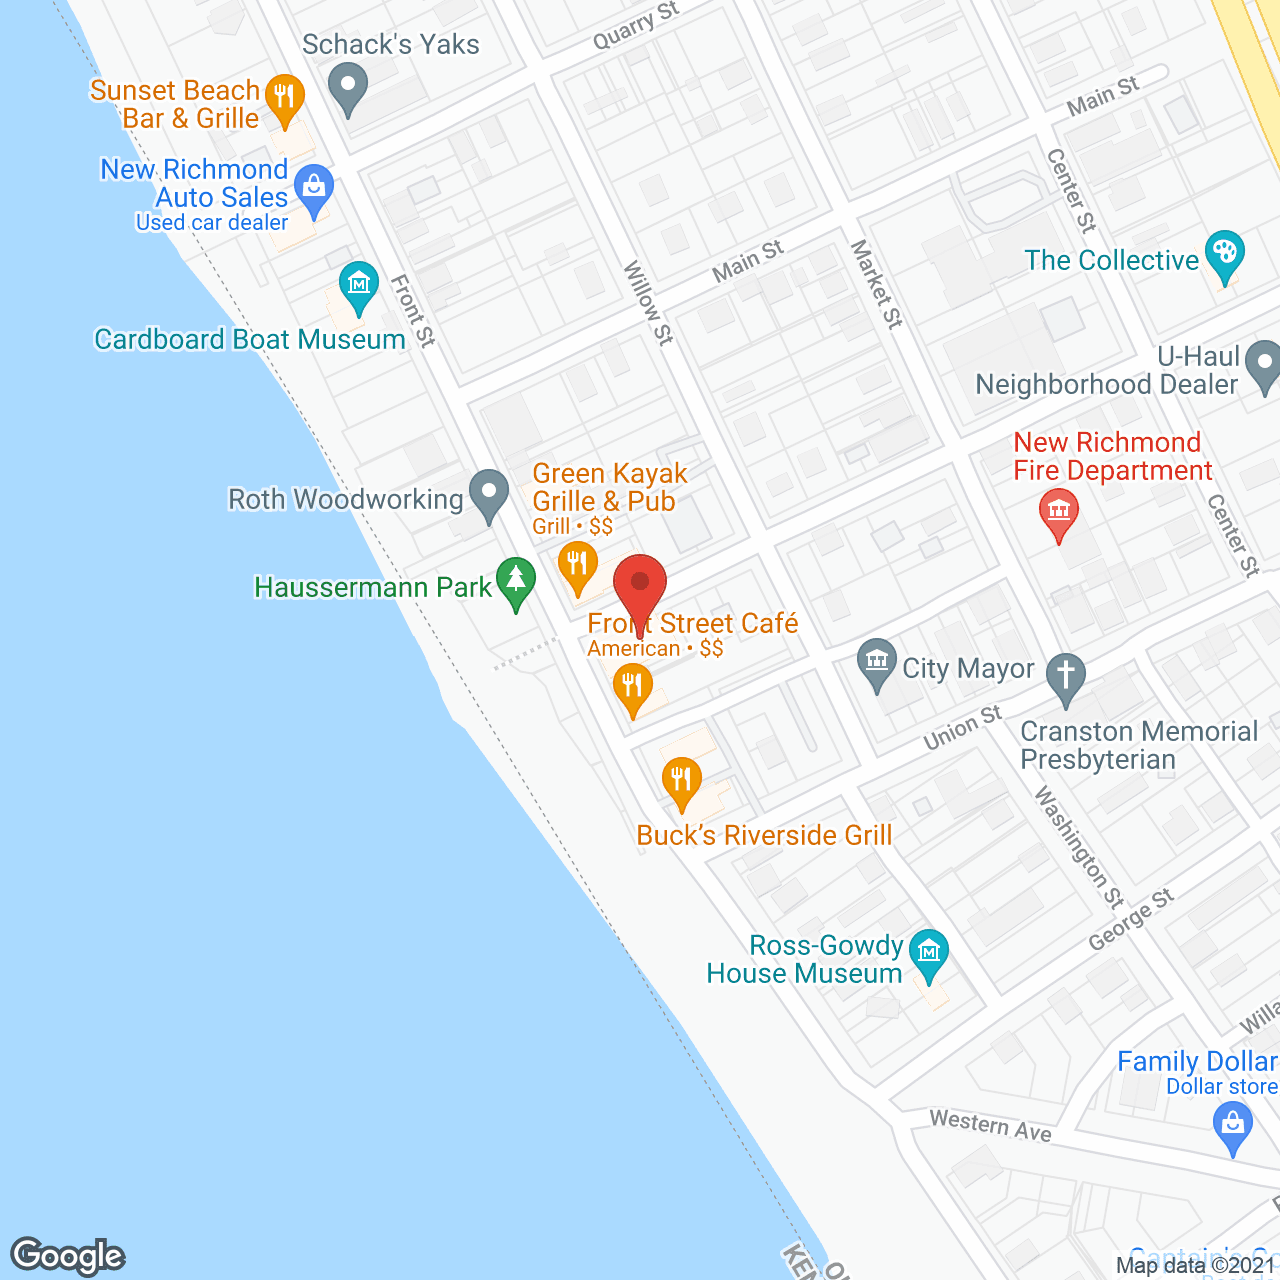 Angels Above and Beyond Home Health Services in google map